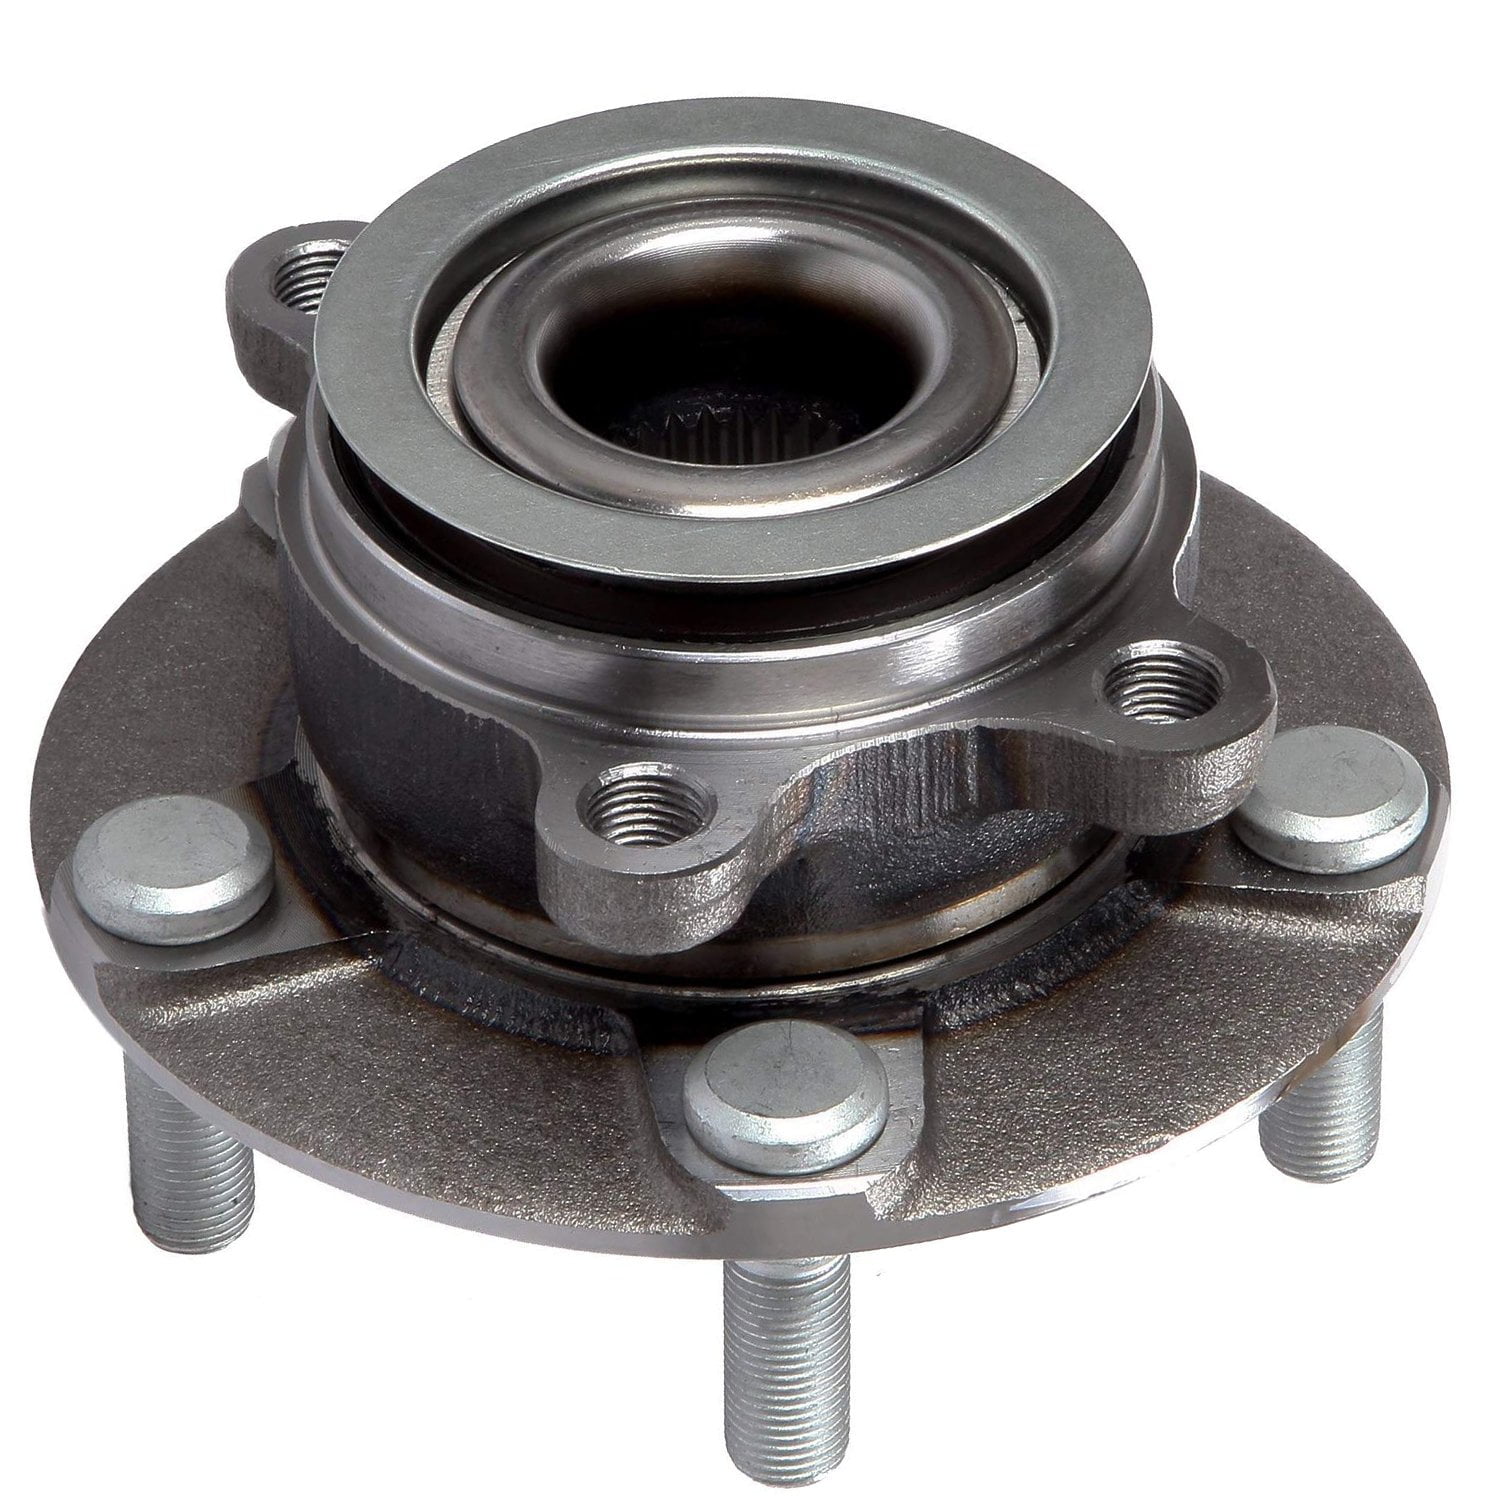 Autoround 513298 Wheel Hub and Bearing Assembly Front Axle for 2008-13 Nissan Rogue/ 2014-15 Rogue Select/ 2007-12 Sentra 